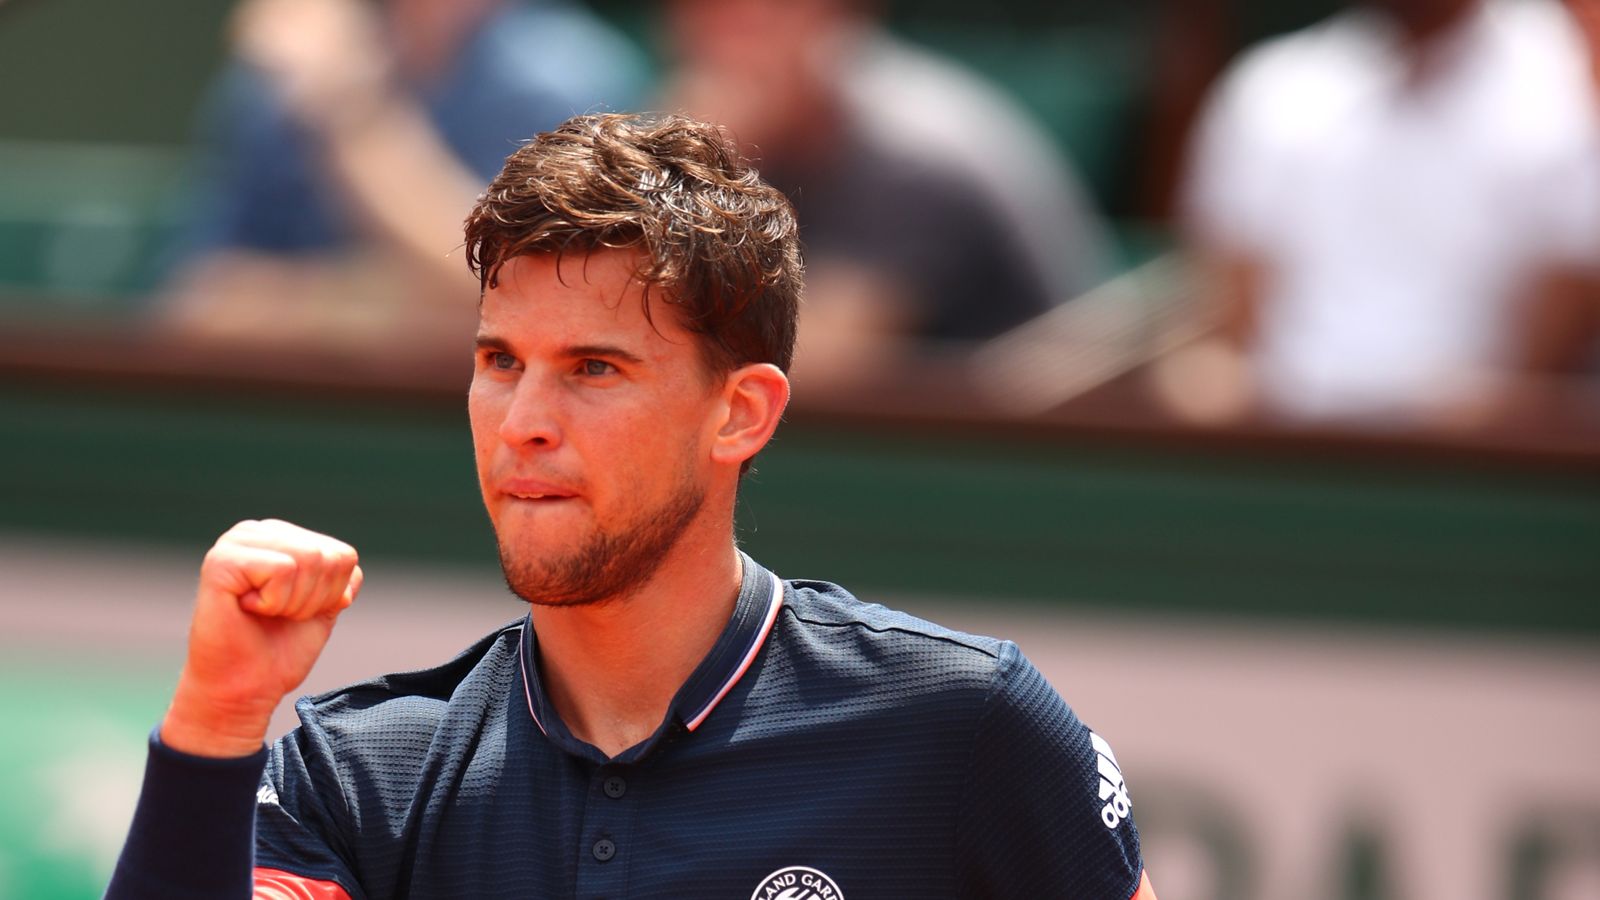 Dominic Thiem reaches French Open final with win over Marco Cecchinato